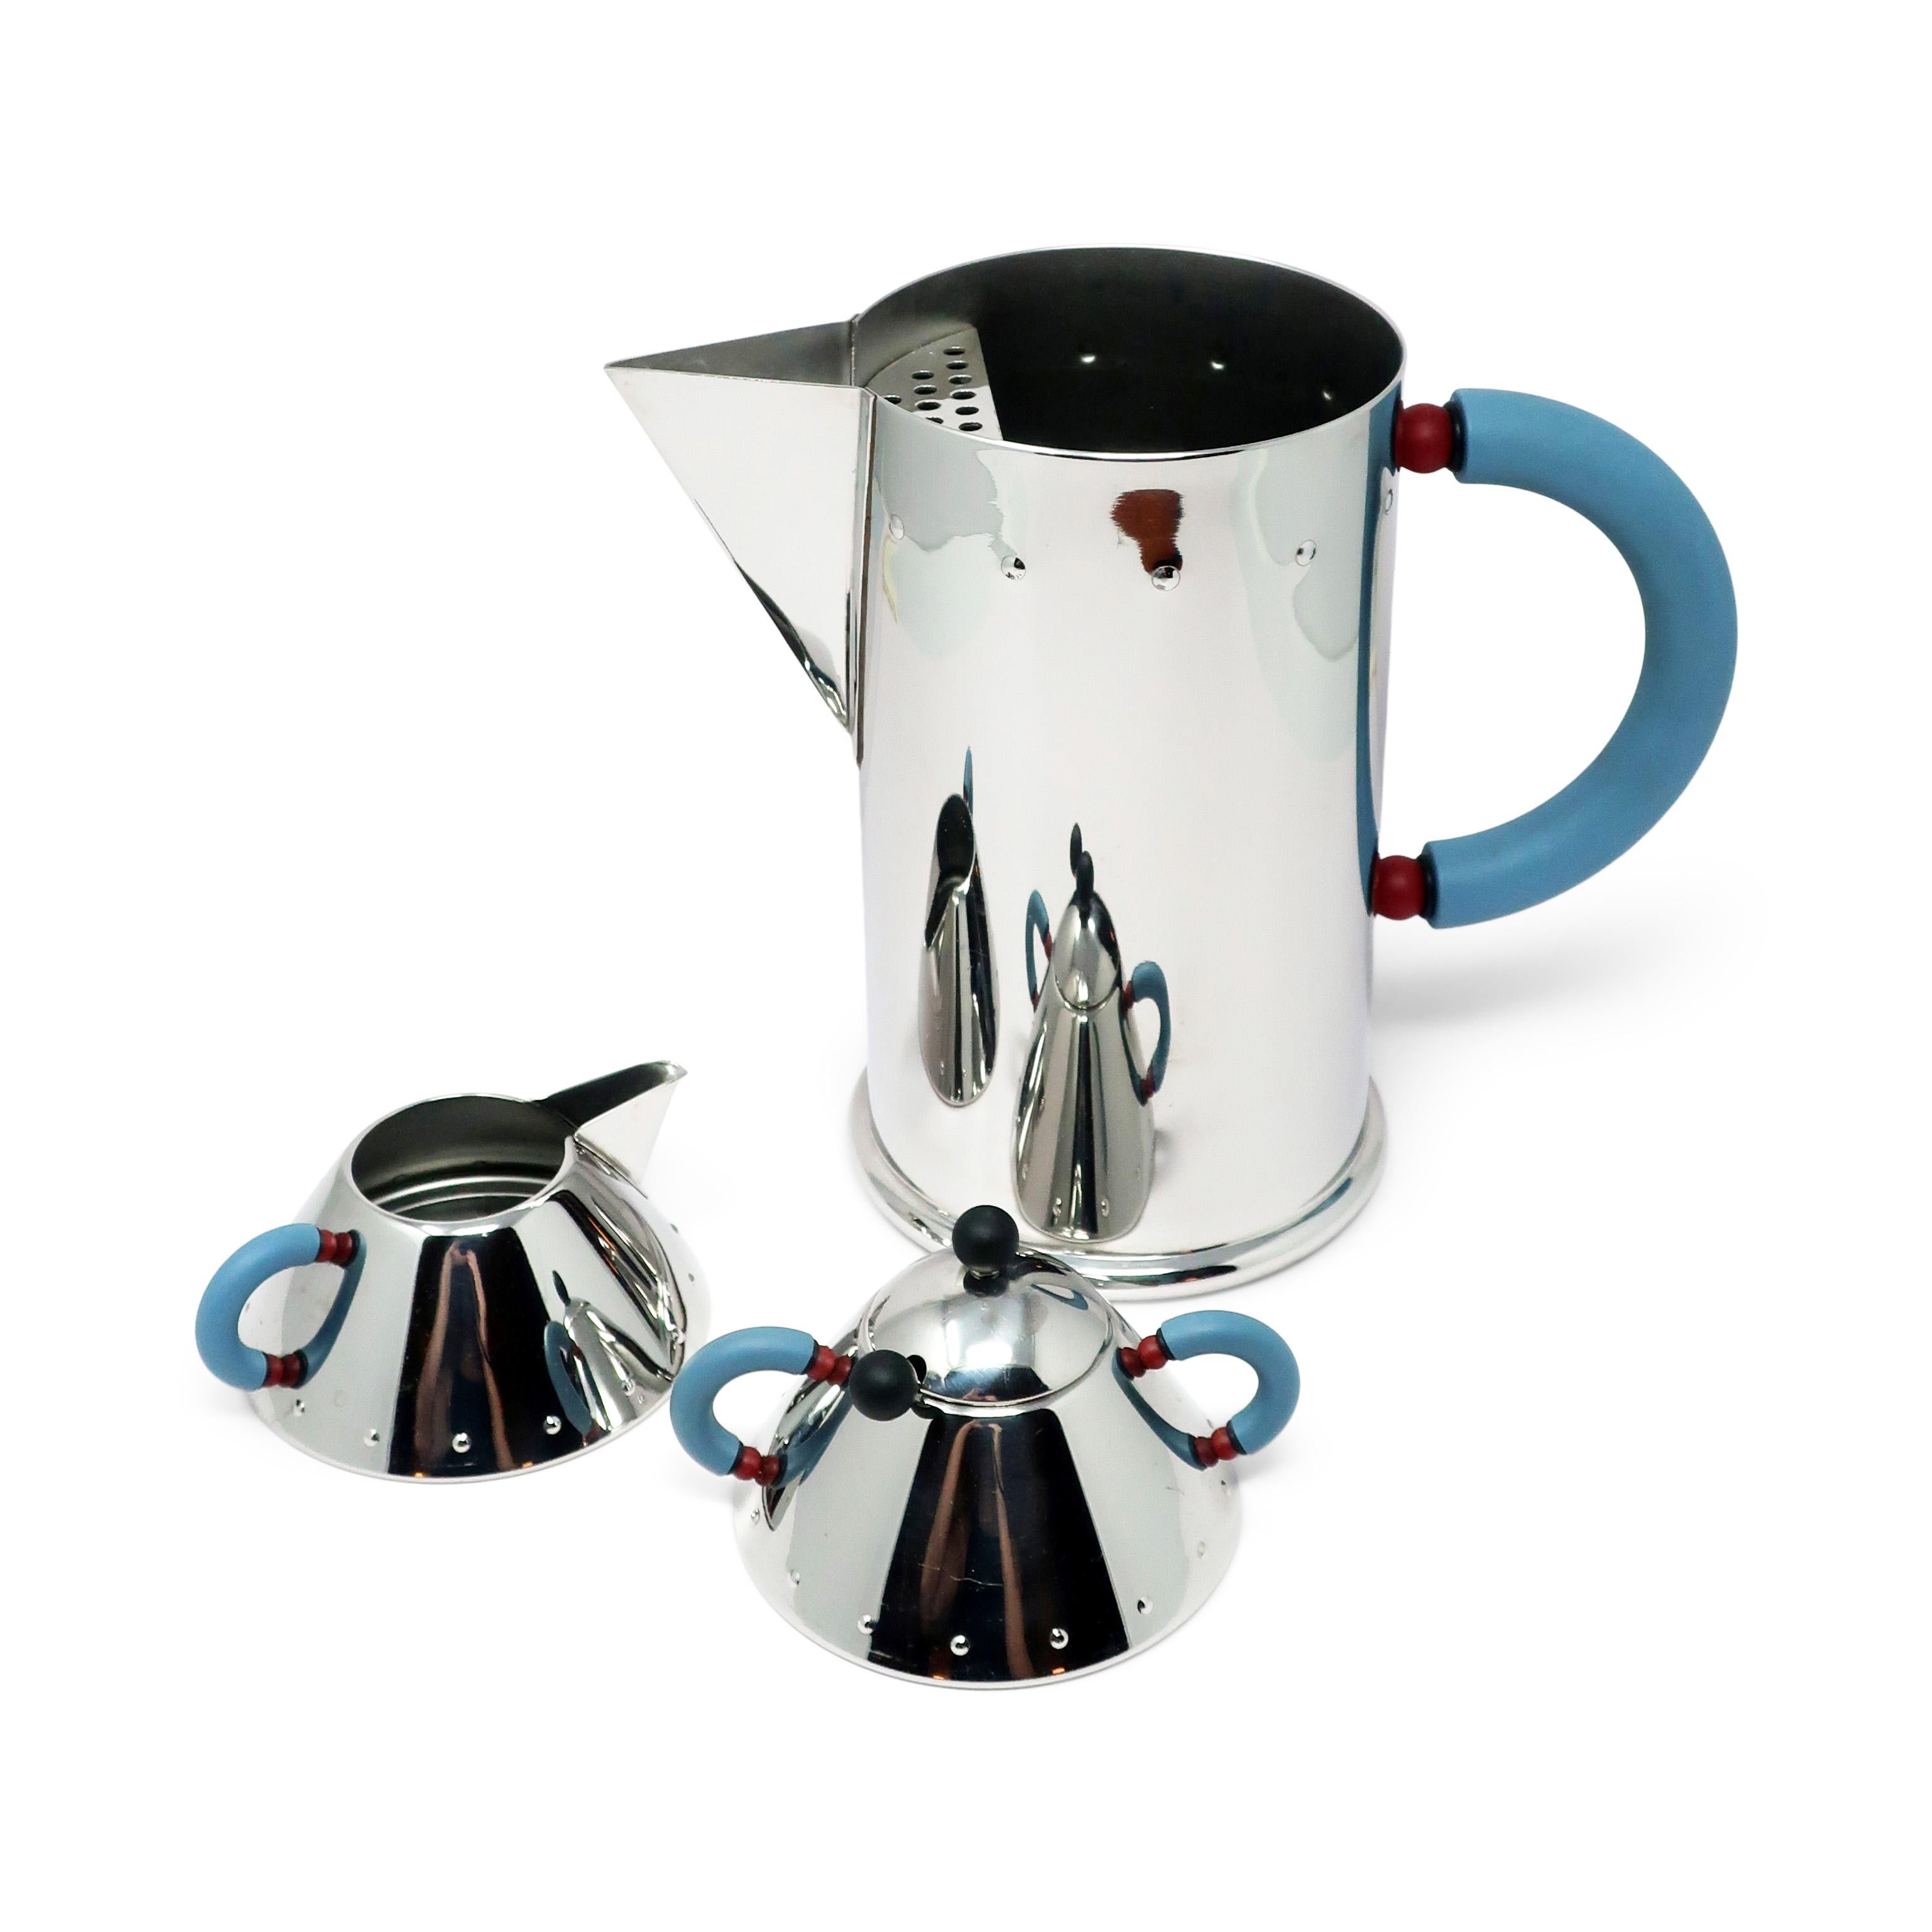 Post-Modern Stainless Pitcher, Creamer and Sugar by Michael Graves for Alessi